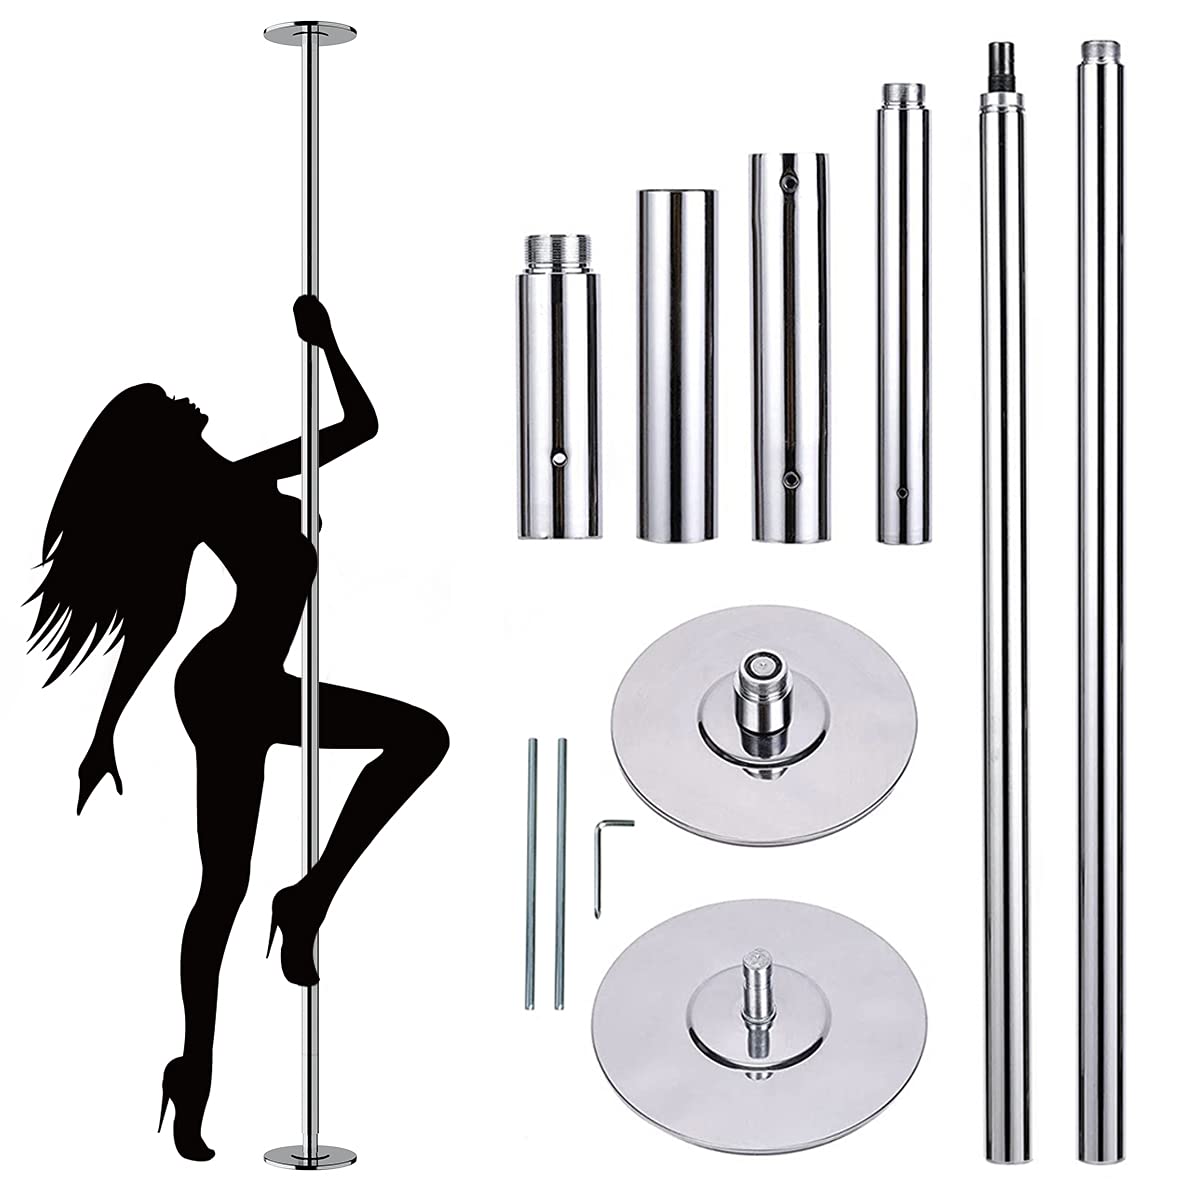 Goplus 45mm Spinning Static Dancing Pole, Portable Removable Dance